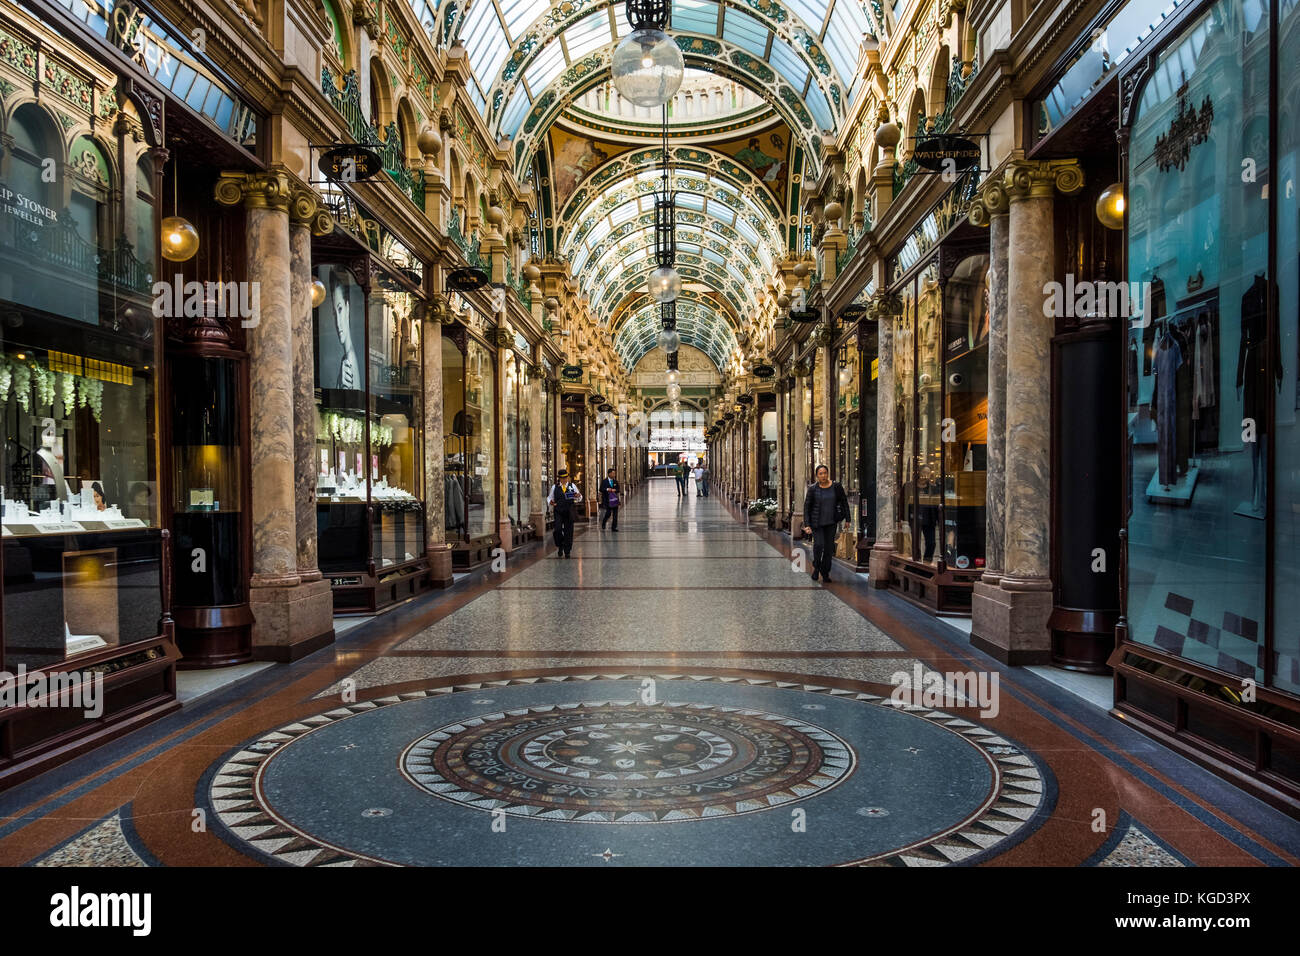 An arcade in the Victoria Quarter in Leeds. Stock Photo